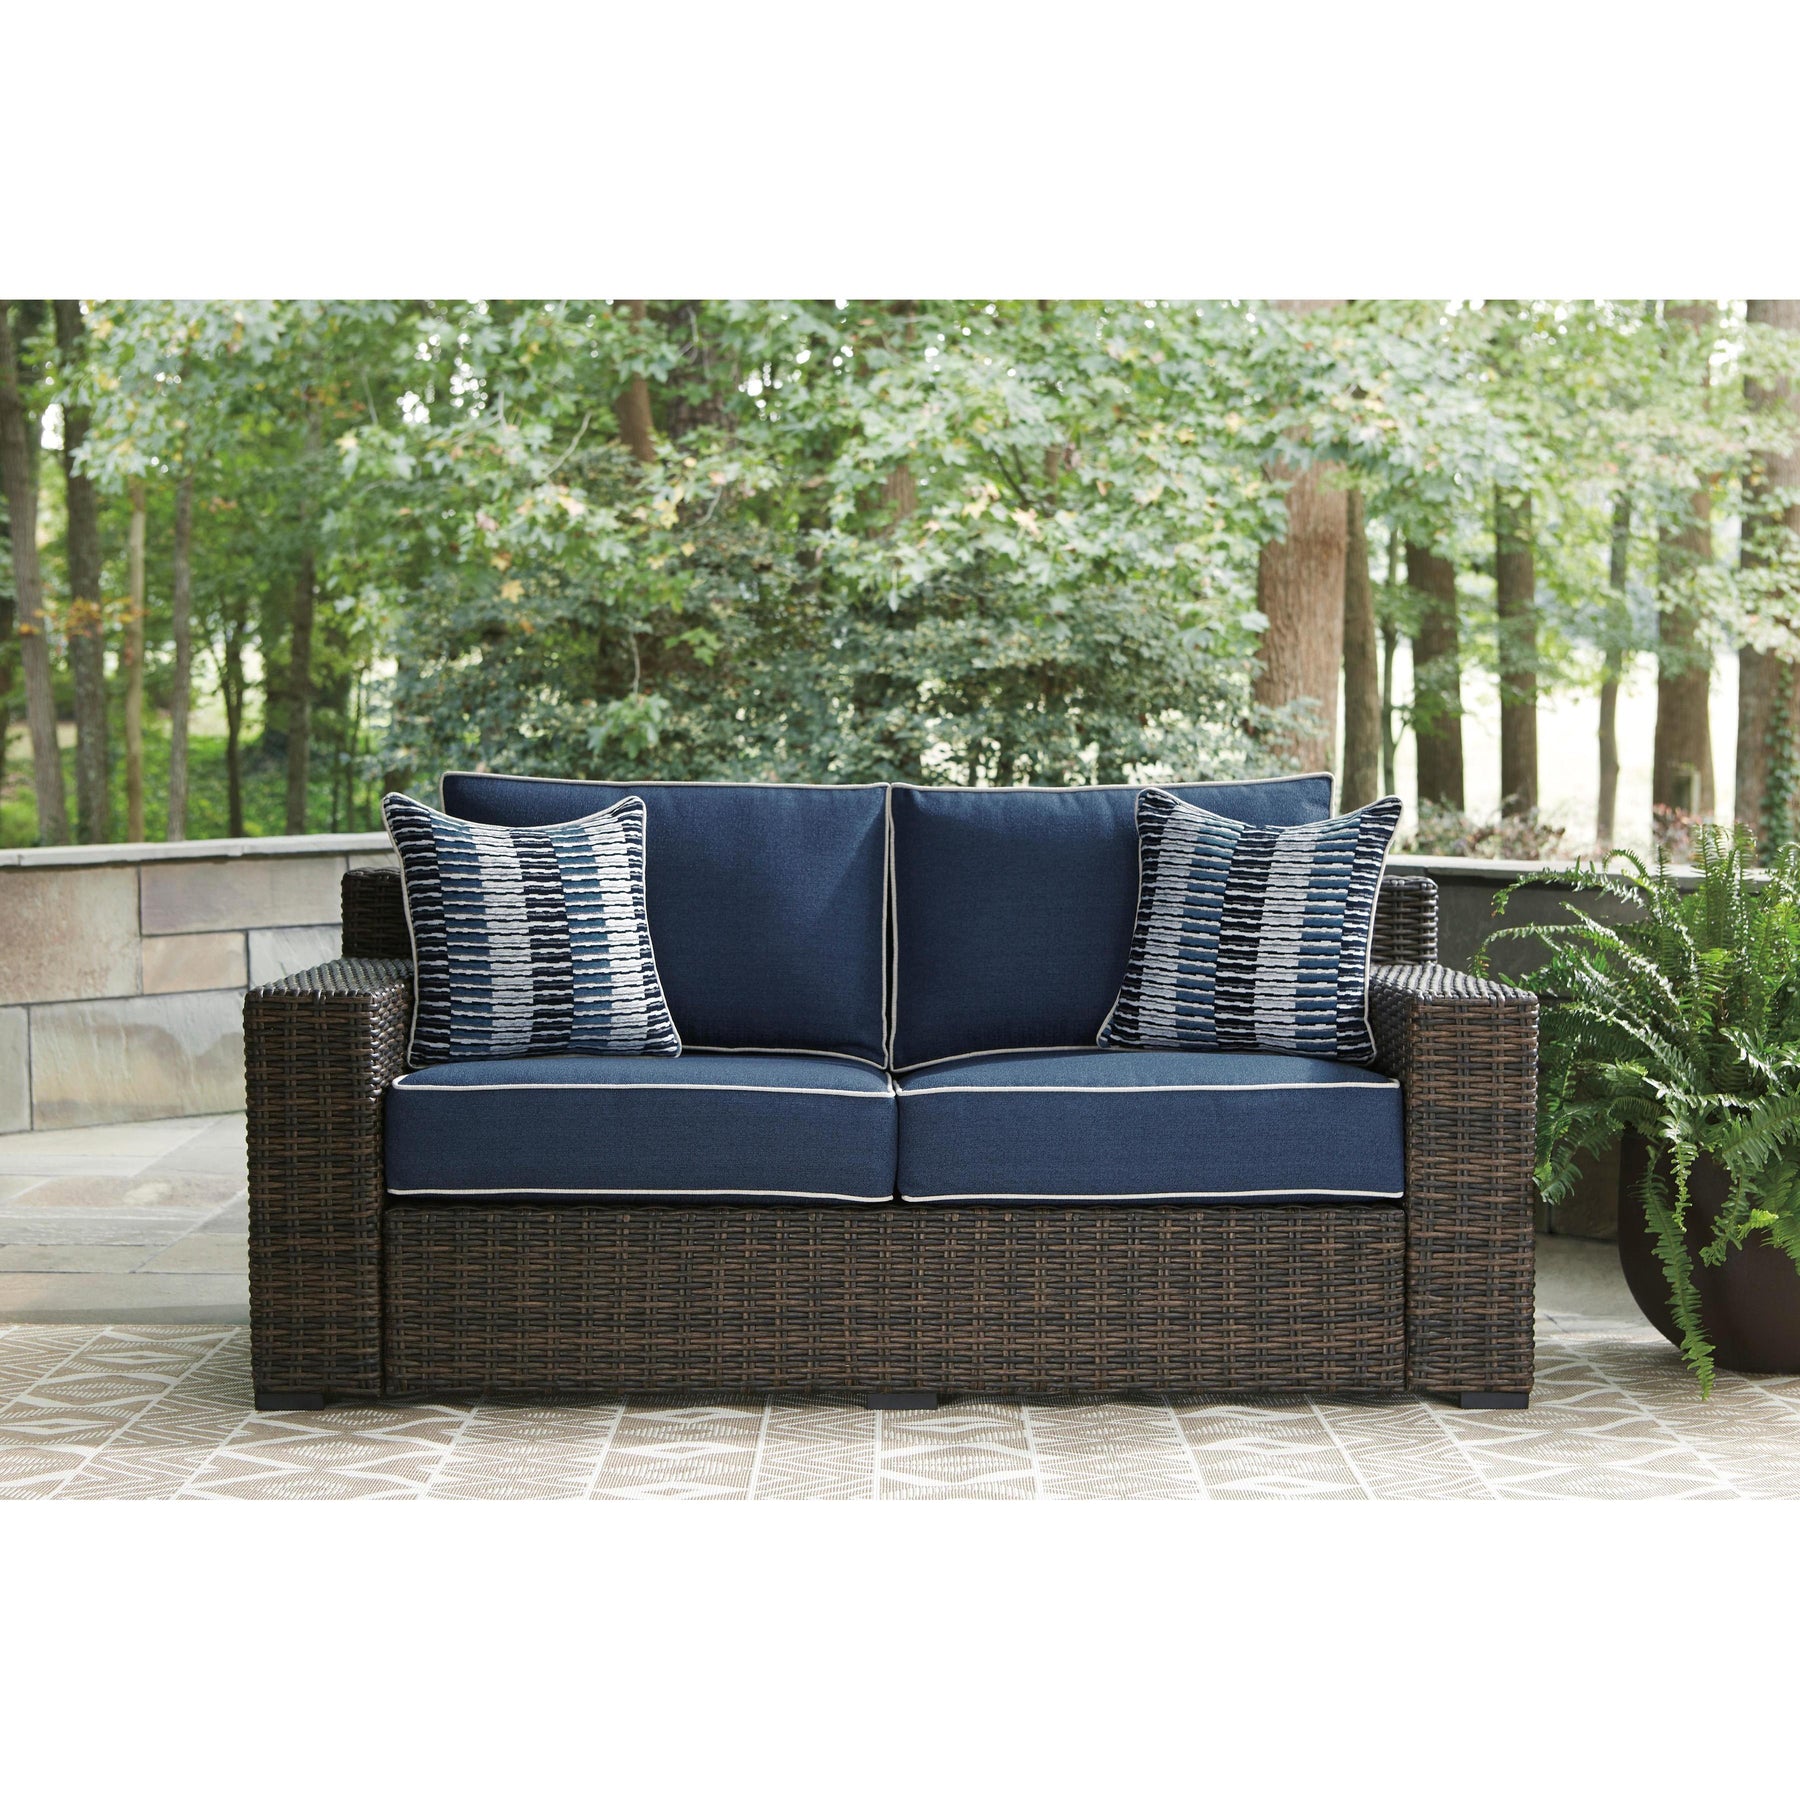 Signature Design by Ashley Grasson Lane P783 2 pc Outdoor Seating Set